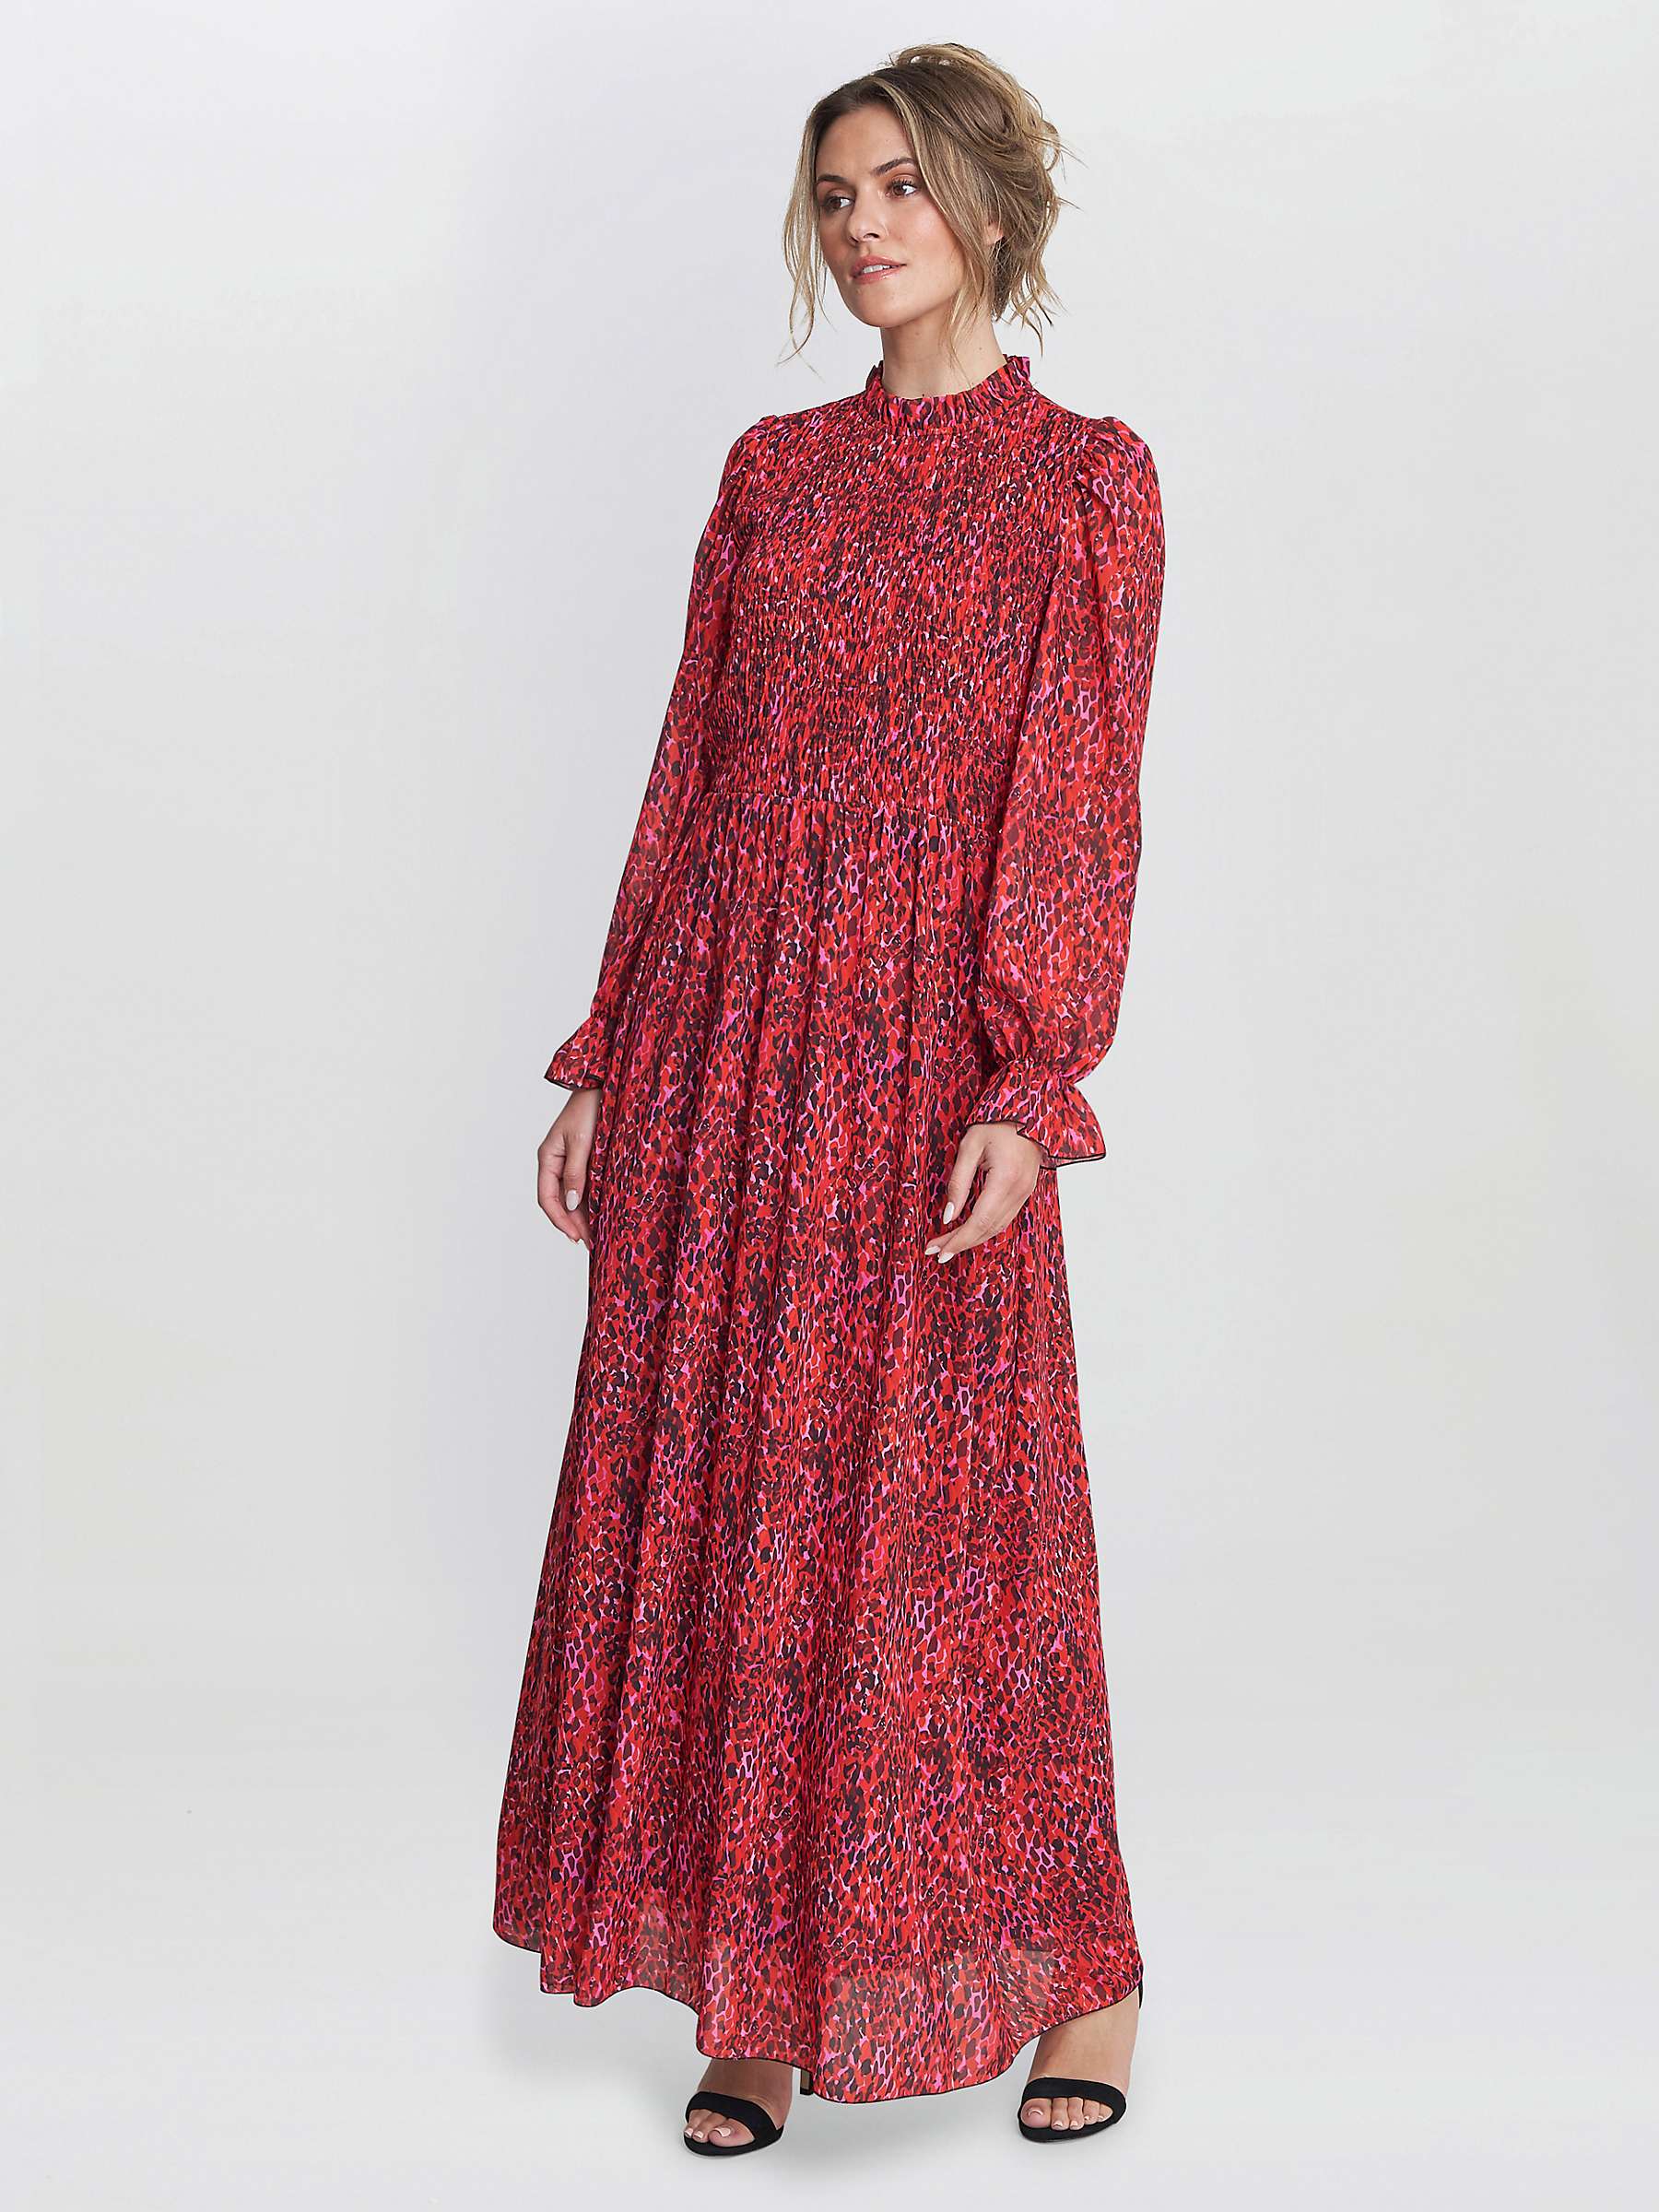 Buy Gina Bacconi Thea Abstract Print Maxi Dress, Red Online at johnlewis.com